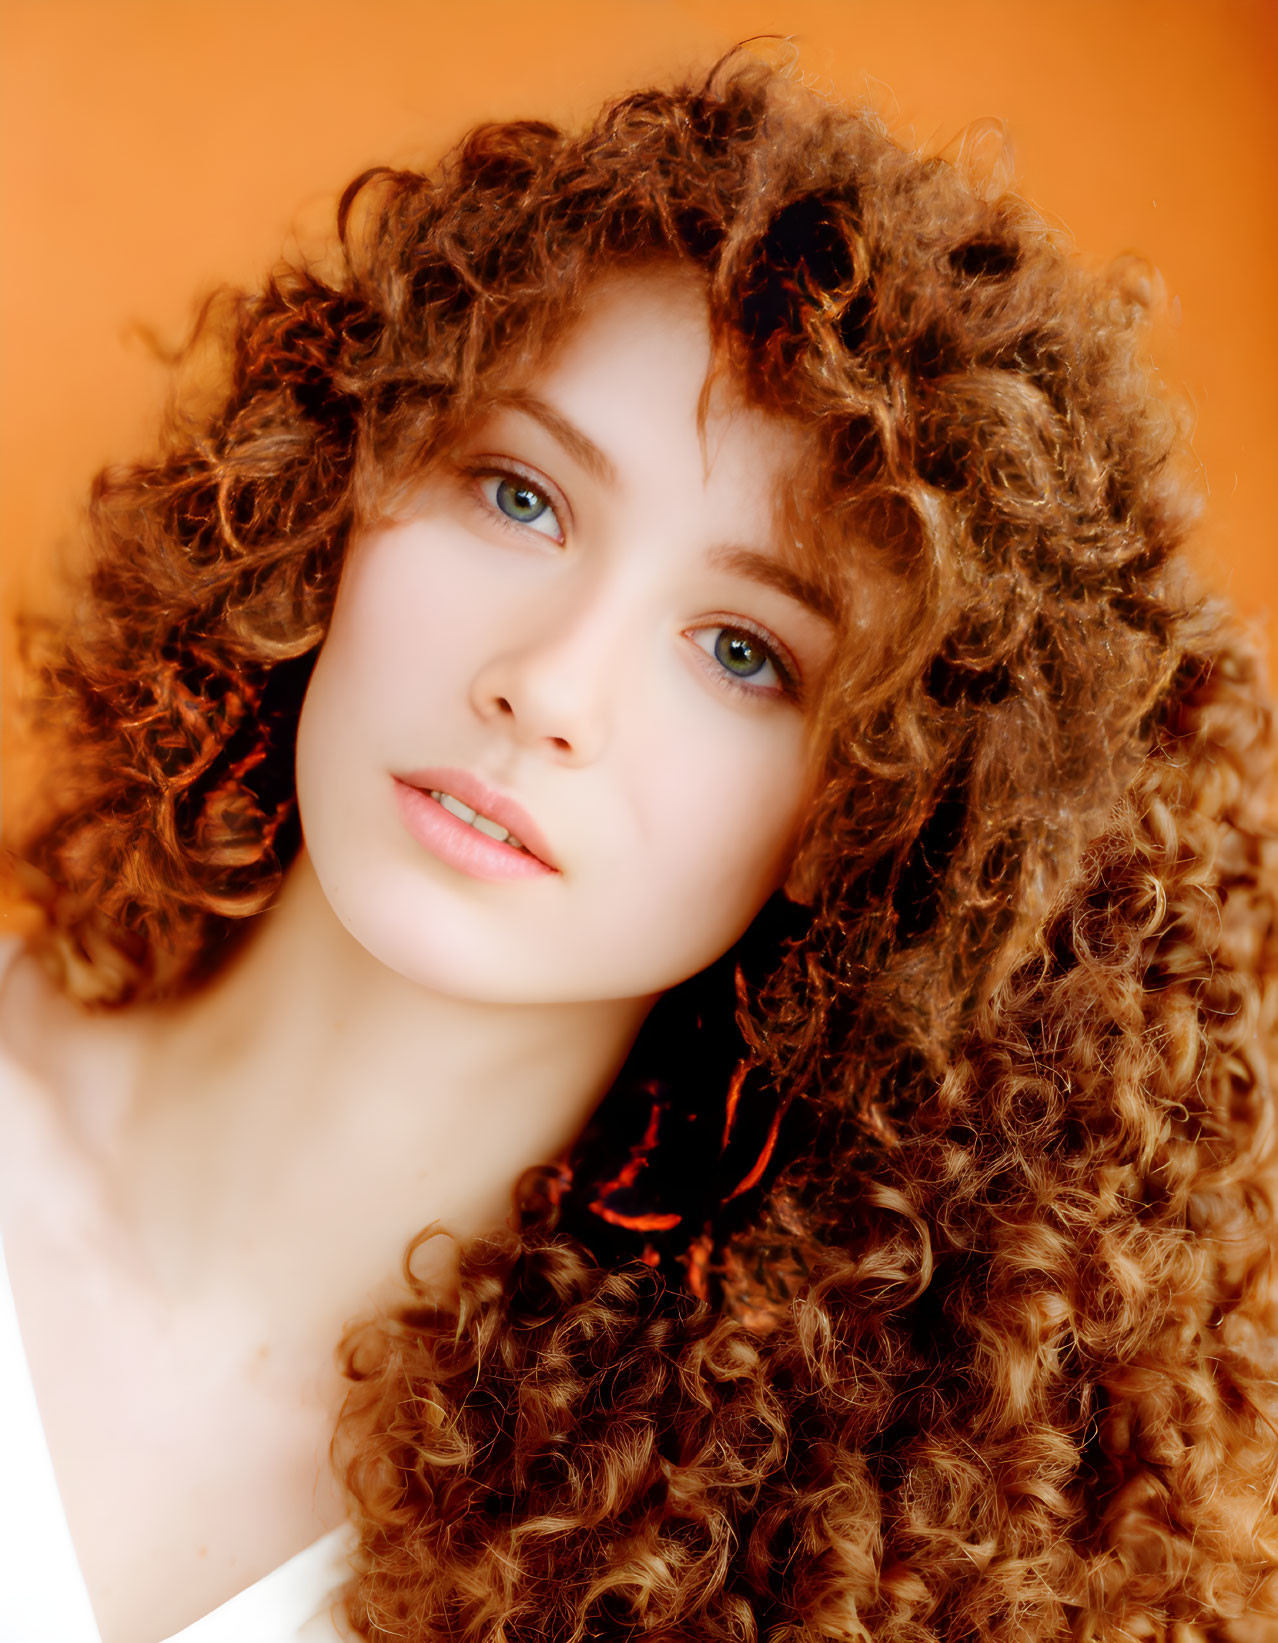 Curly Haired Woman with Blue Eyes on Orange Background